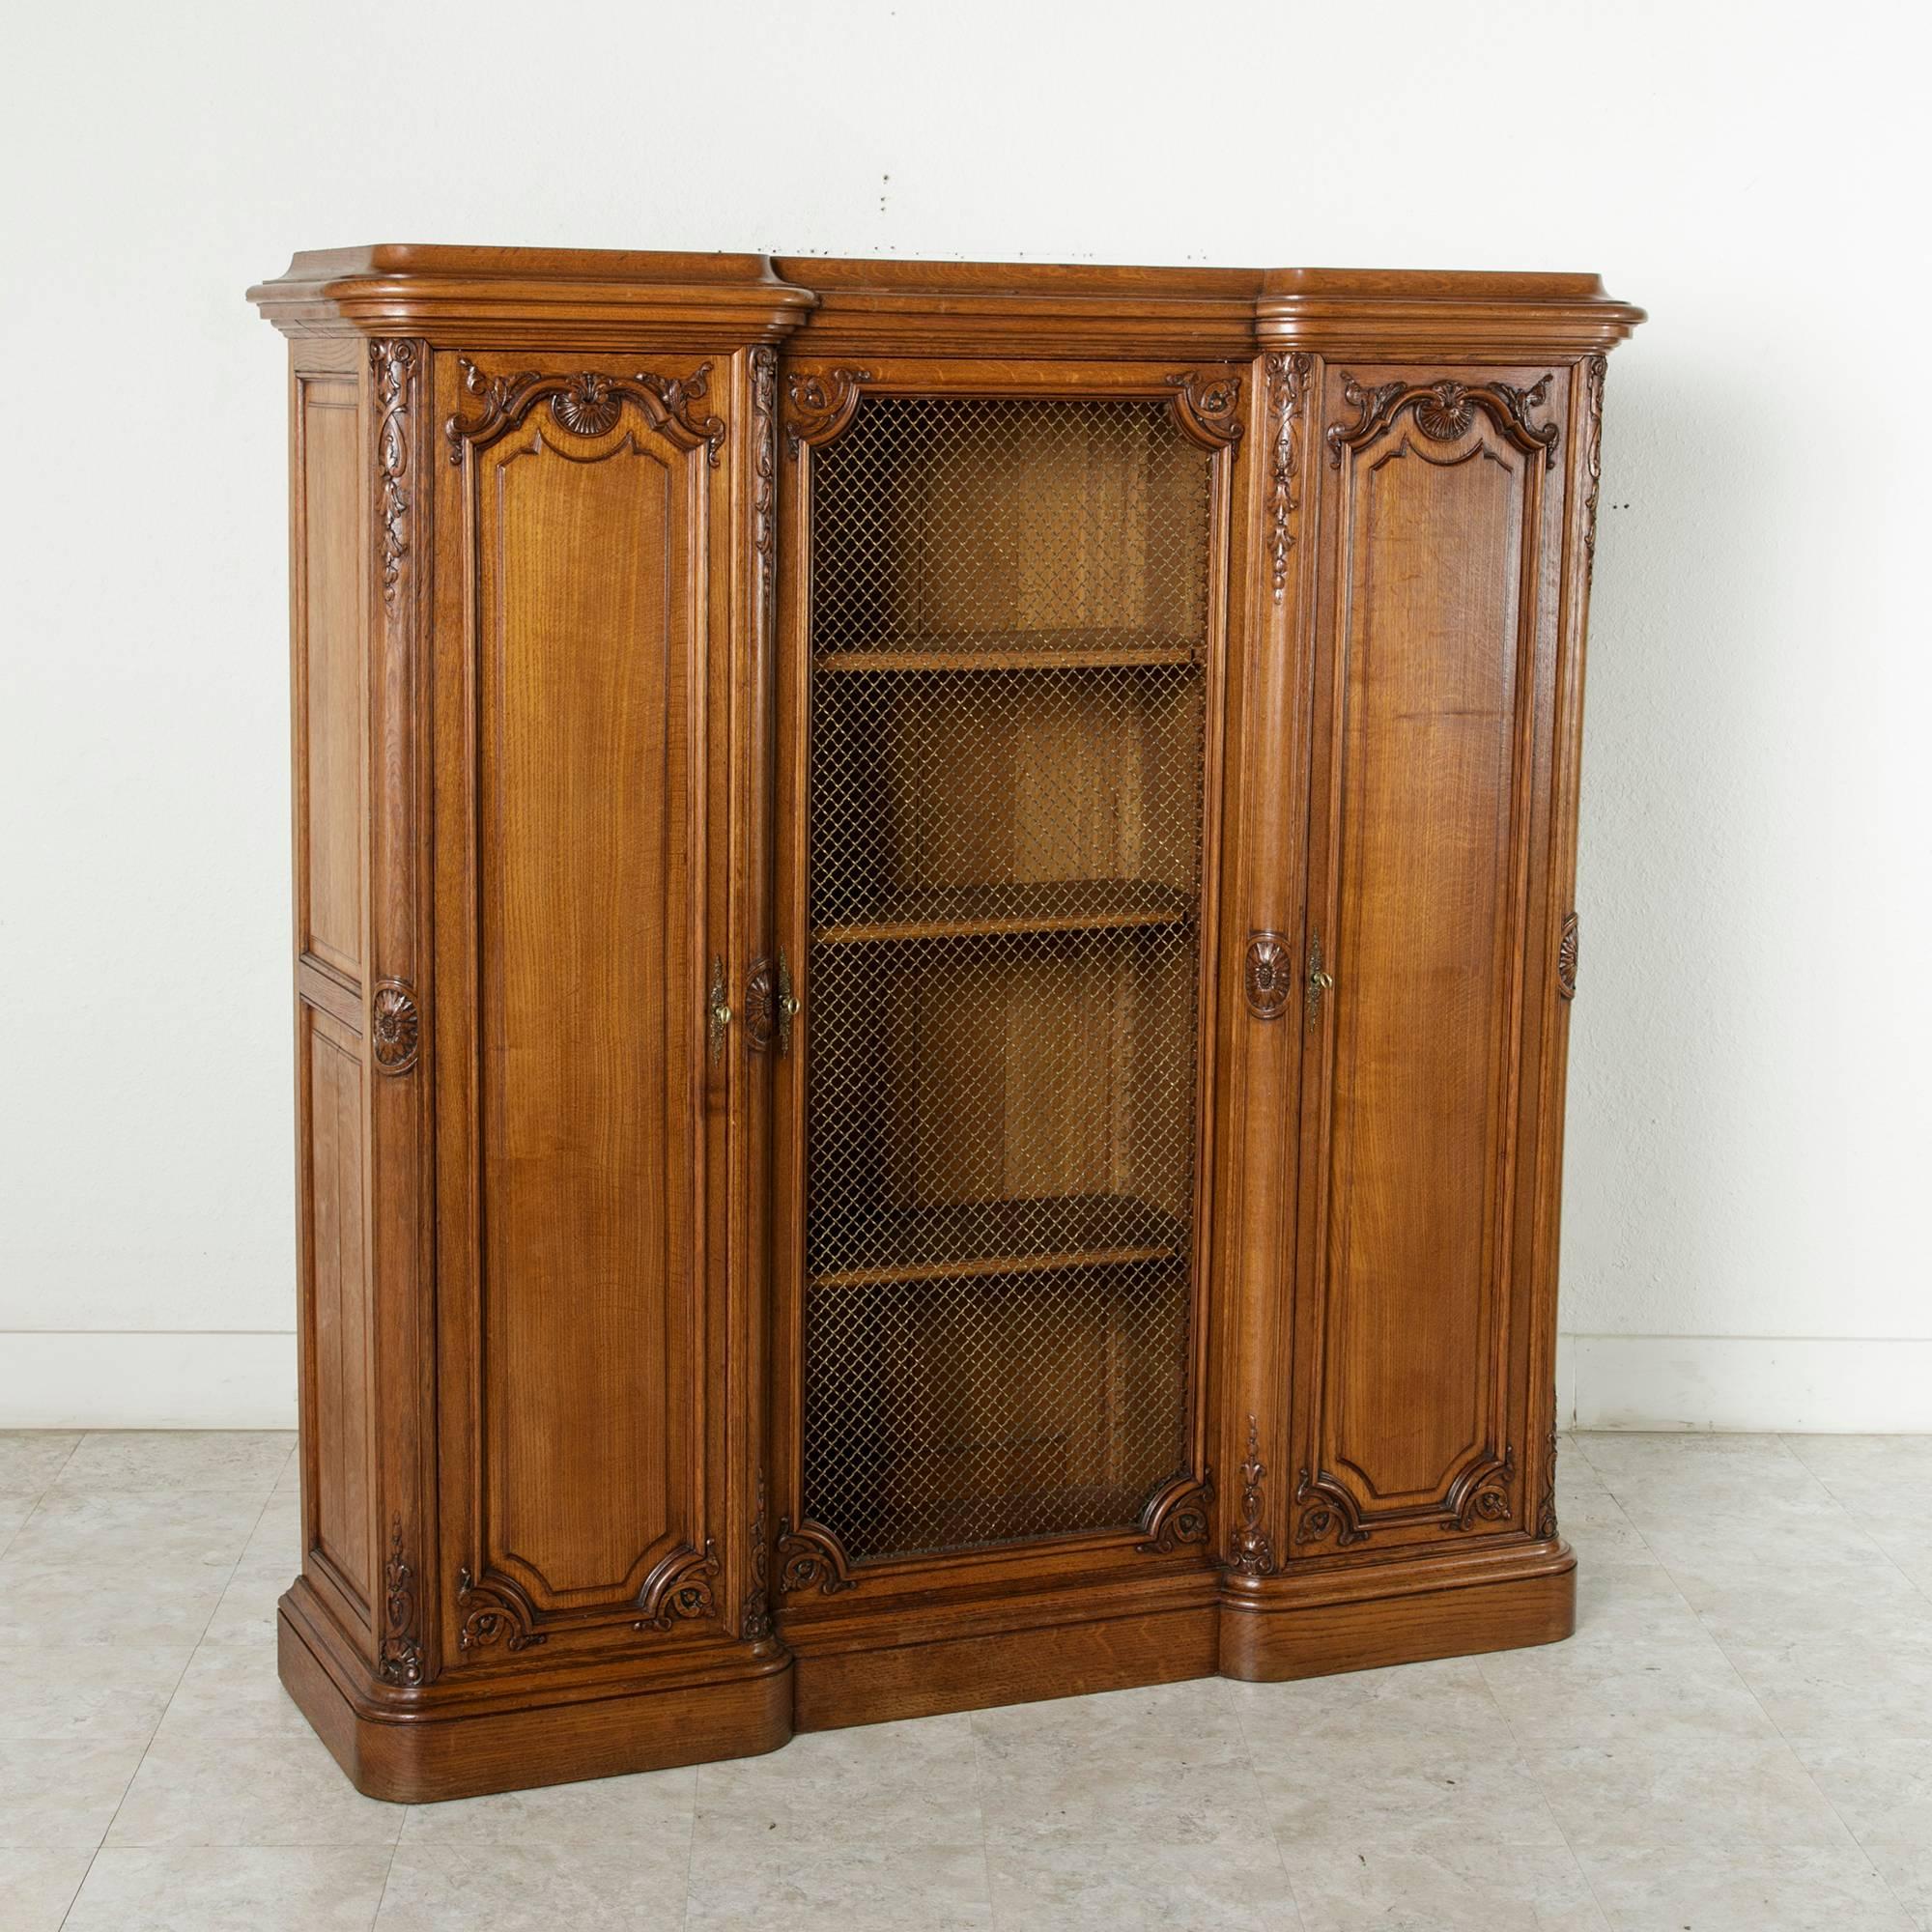 This hand-carved oak French Regency style bibliothèque or bookcase features a central door fitted with bronze wire and flanked by two hand-carved panelled doors. The interior central cabinet has three adjustable shelves, while the flanking cabinets